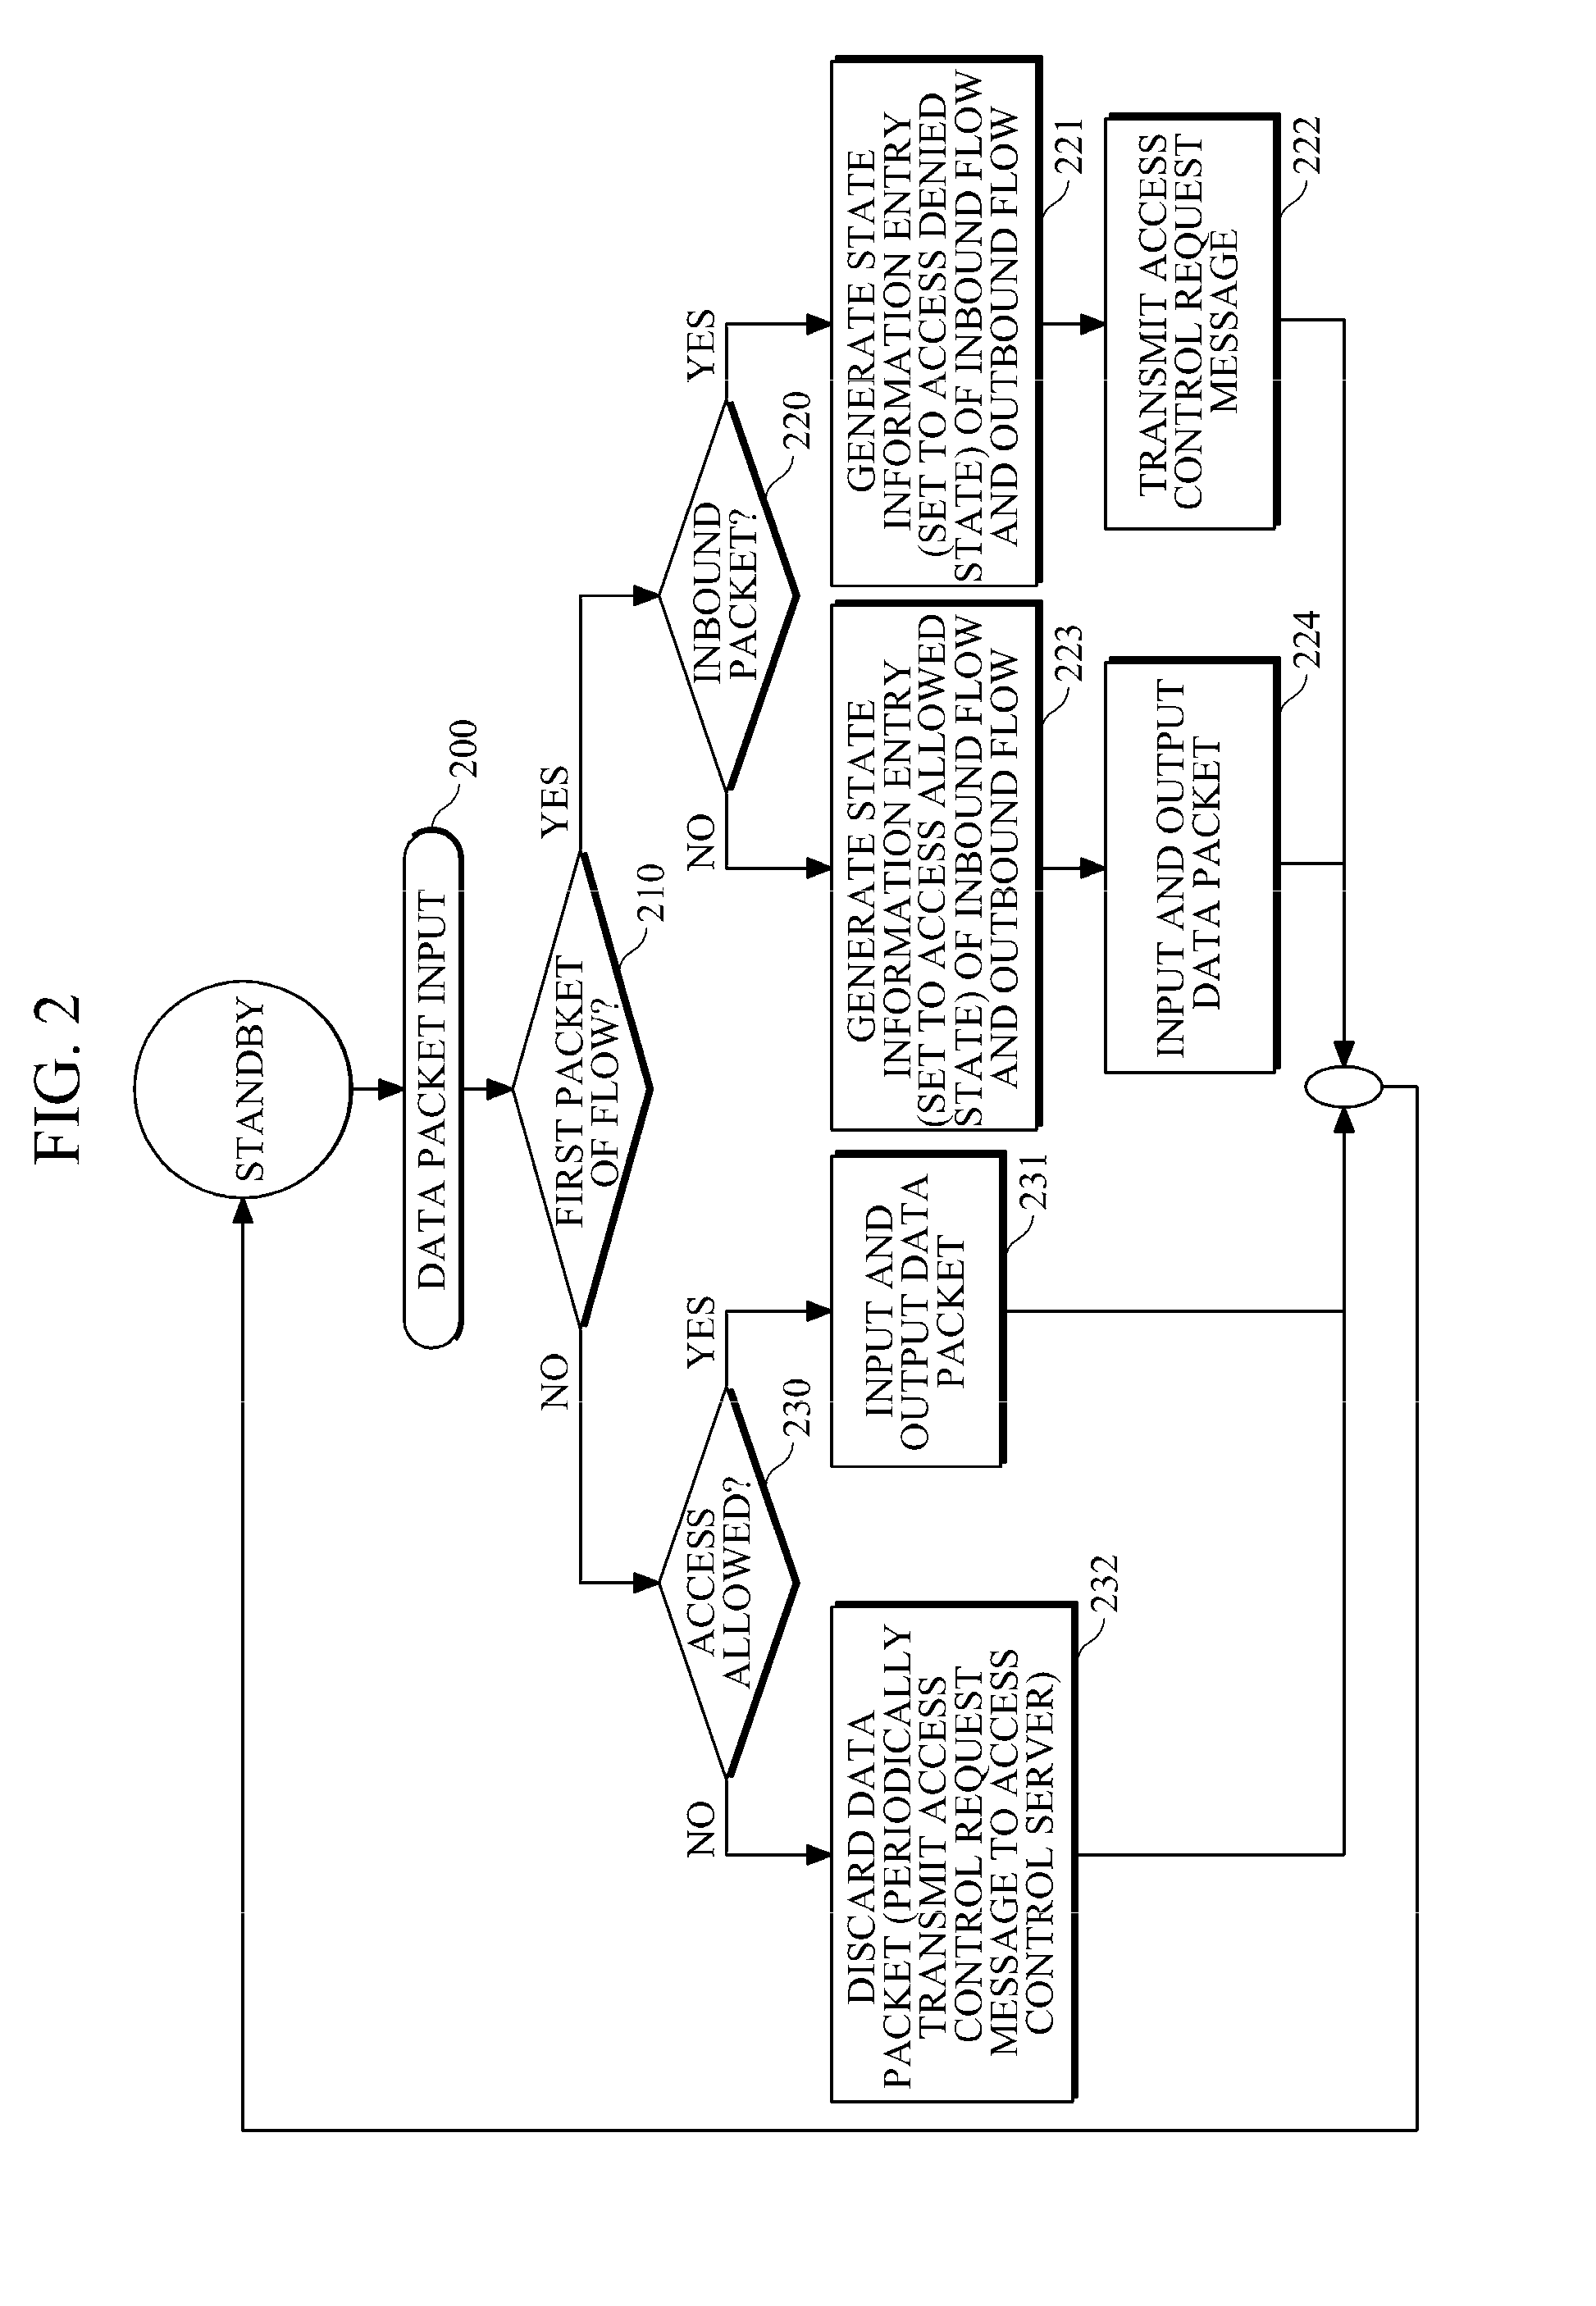 Flow-based dynamic access control system and method